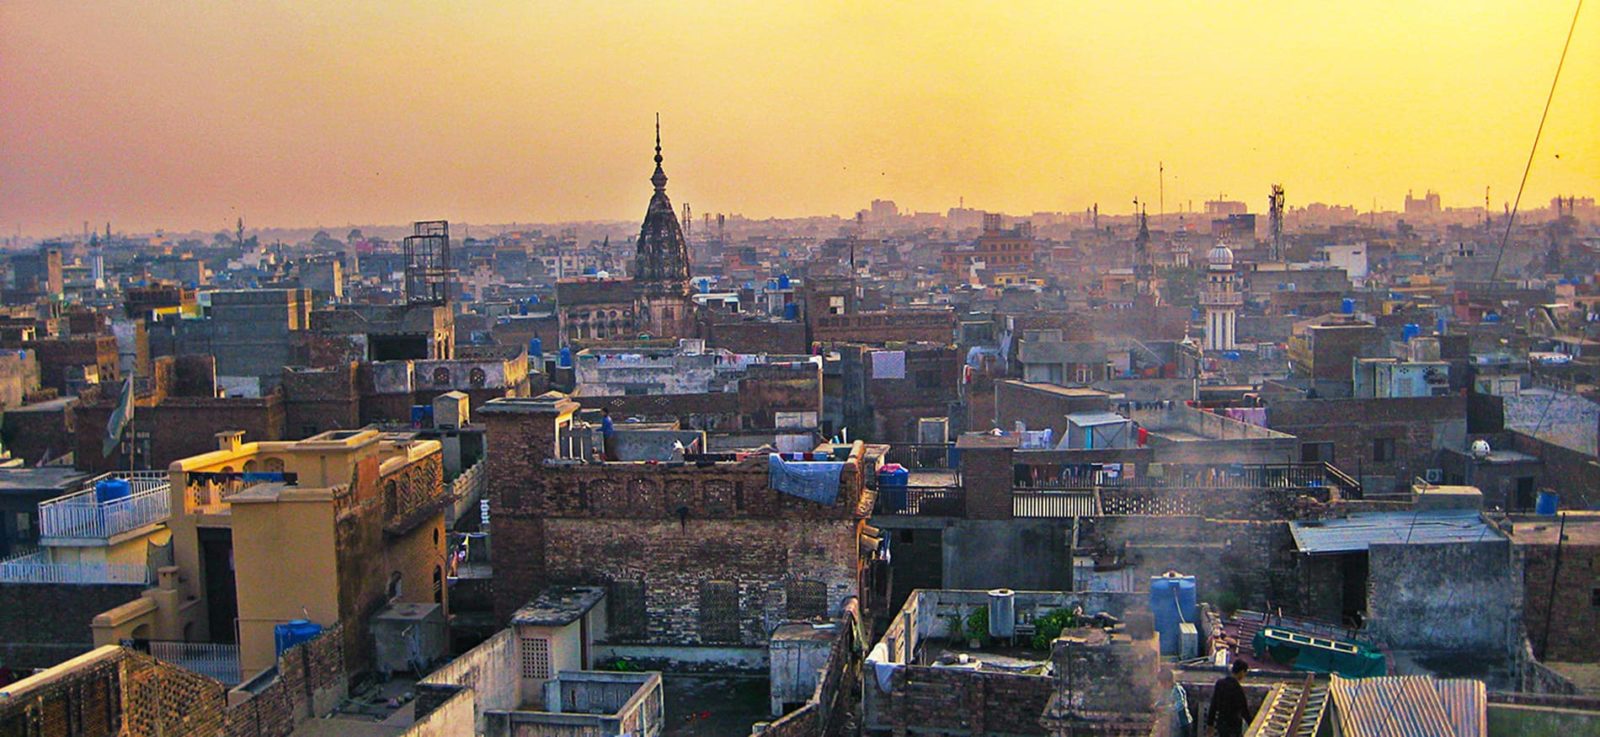 Androon Pindi houses sunset view 